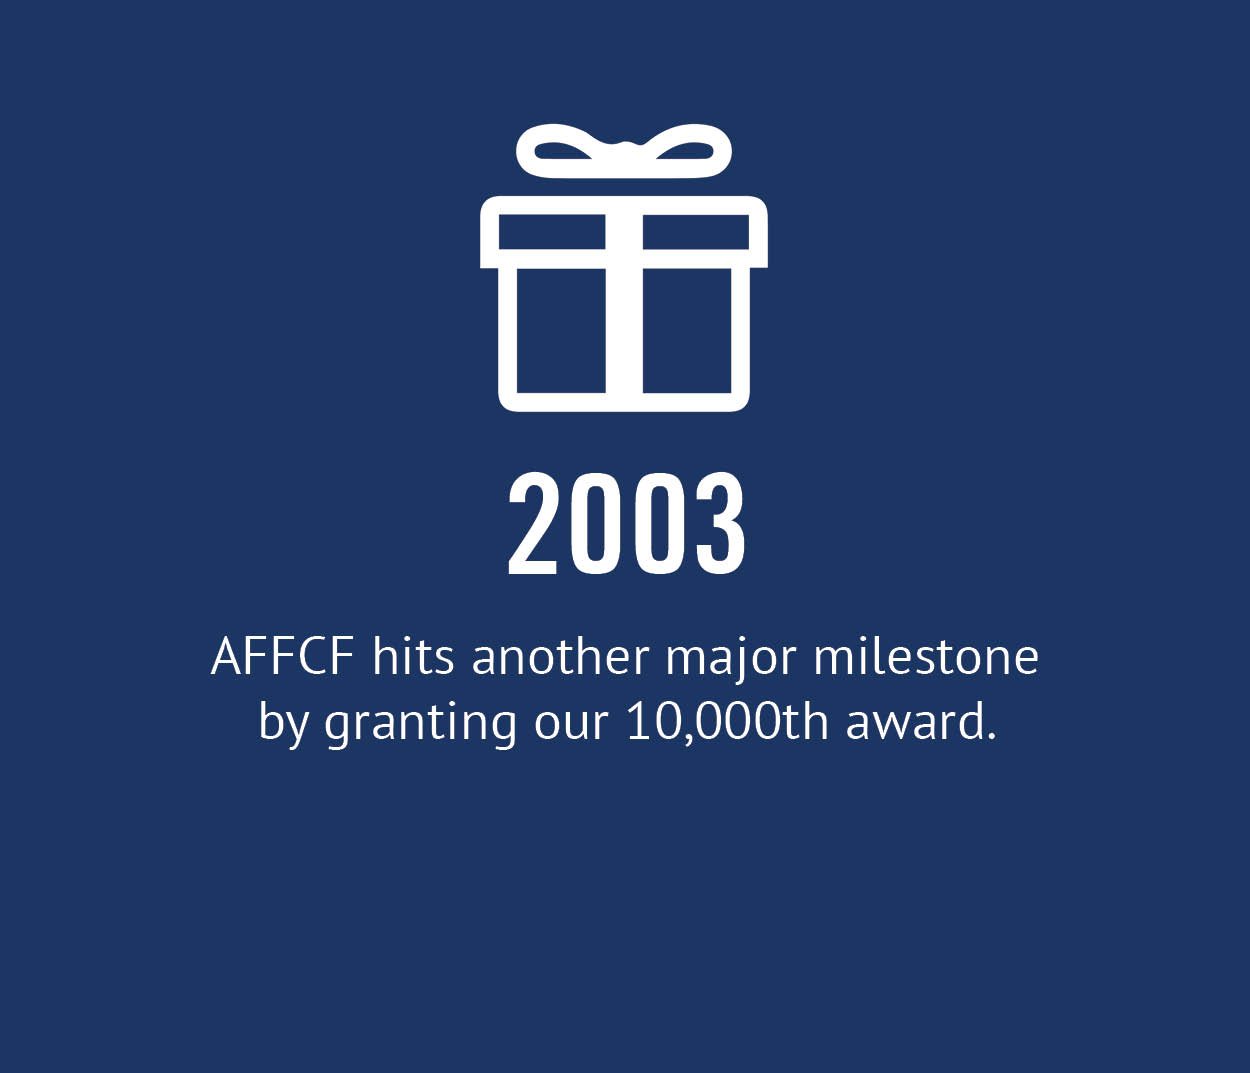 2003 - AFFCF hits another major milestone by granting our 10,000th award.